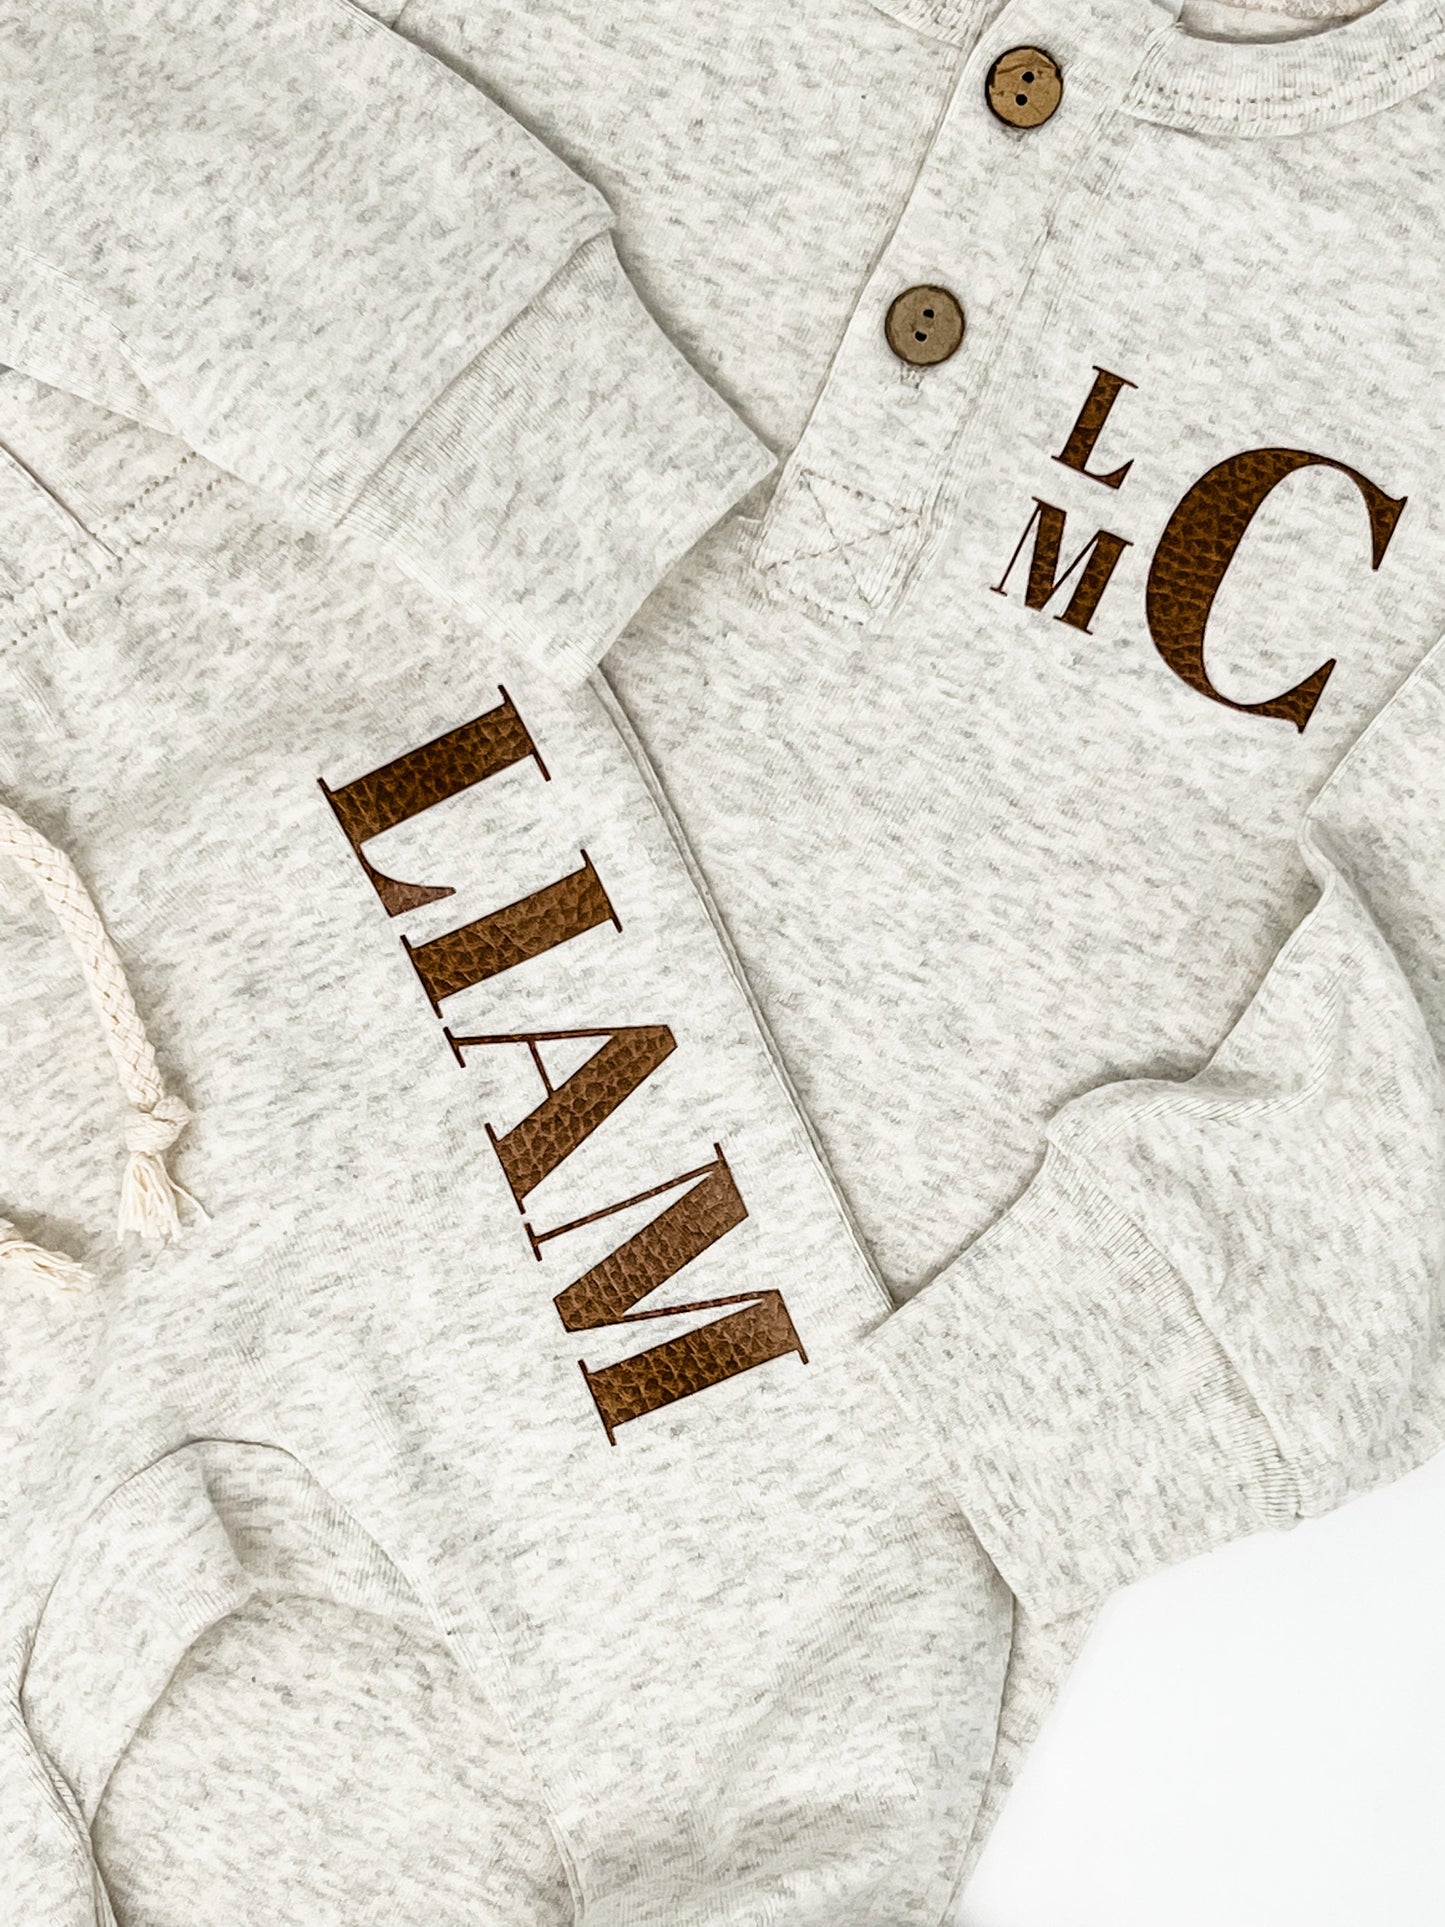 Baby Boy Personalized Name/ Initials Coming Home Set